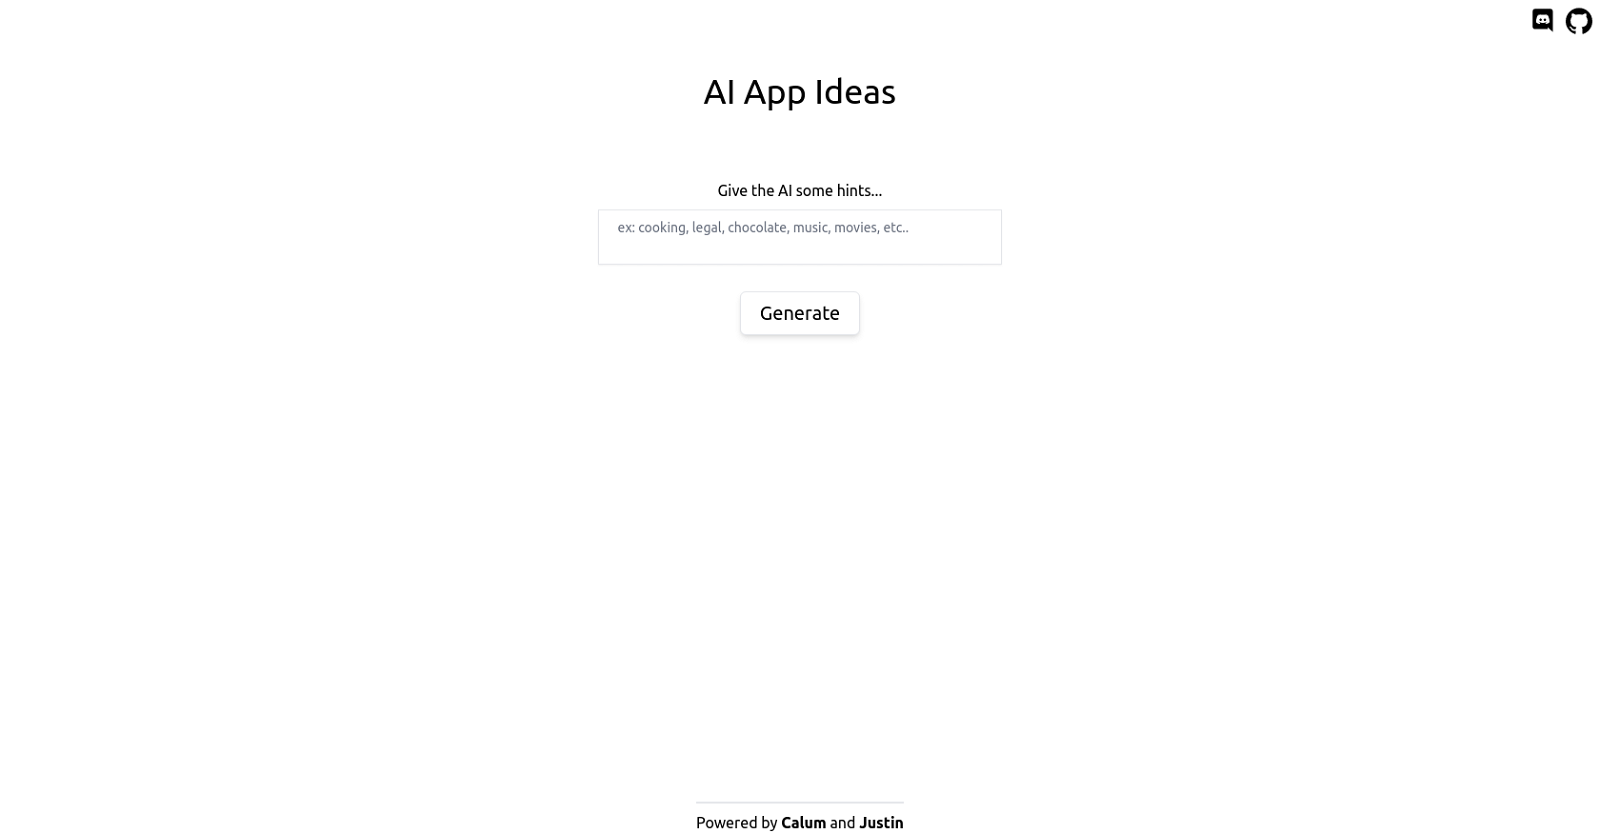 Aiappideas
.